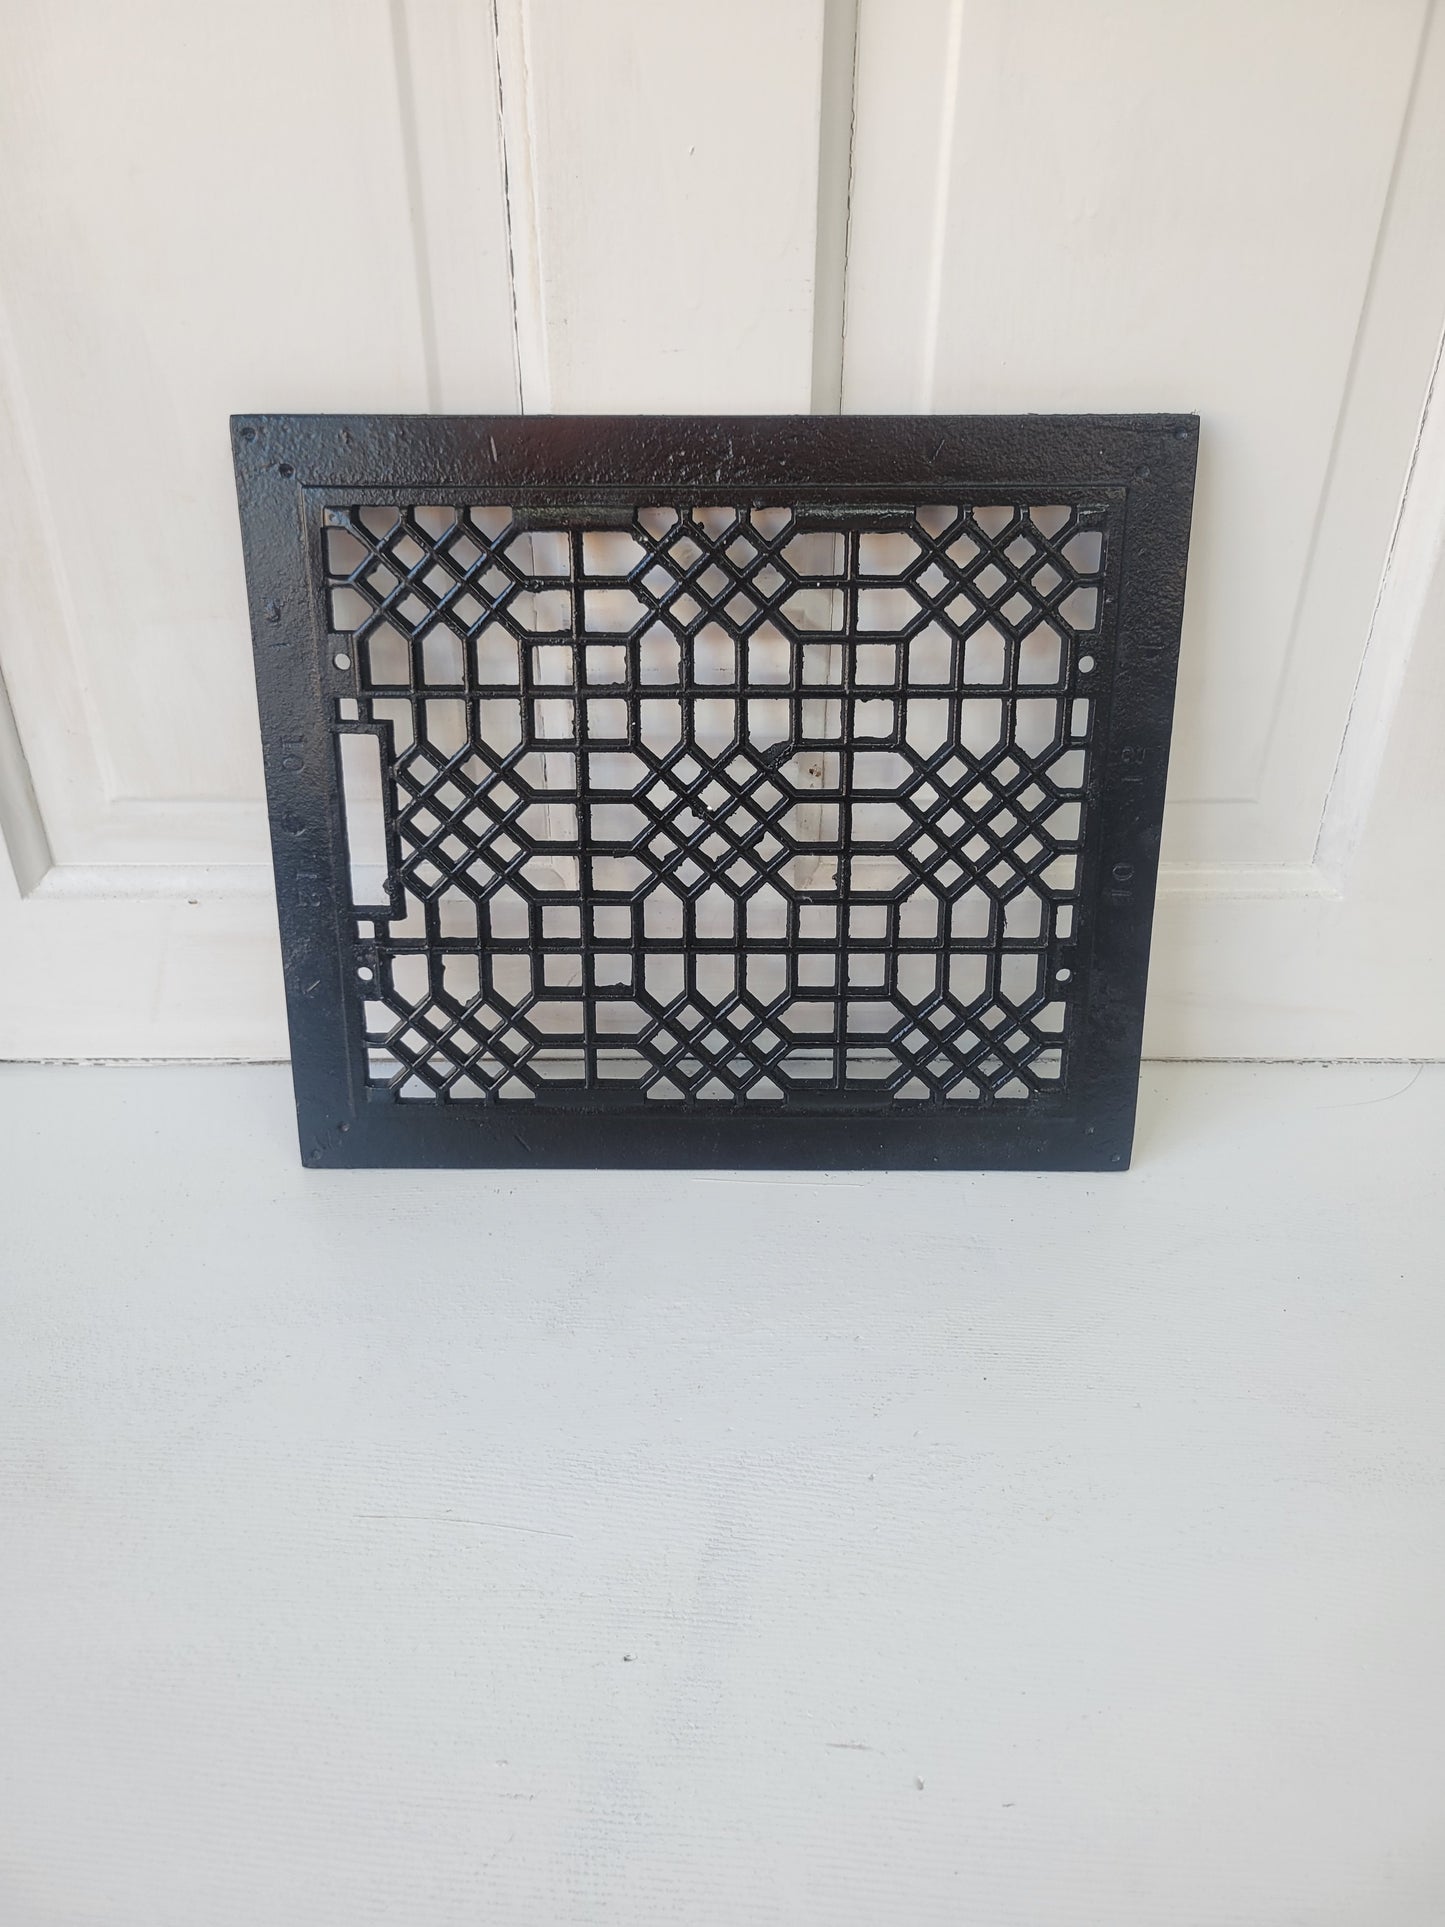 Refinished 14 x 12 Antique Cast Iron Vent Cover, Floor Register Cover #080303